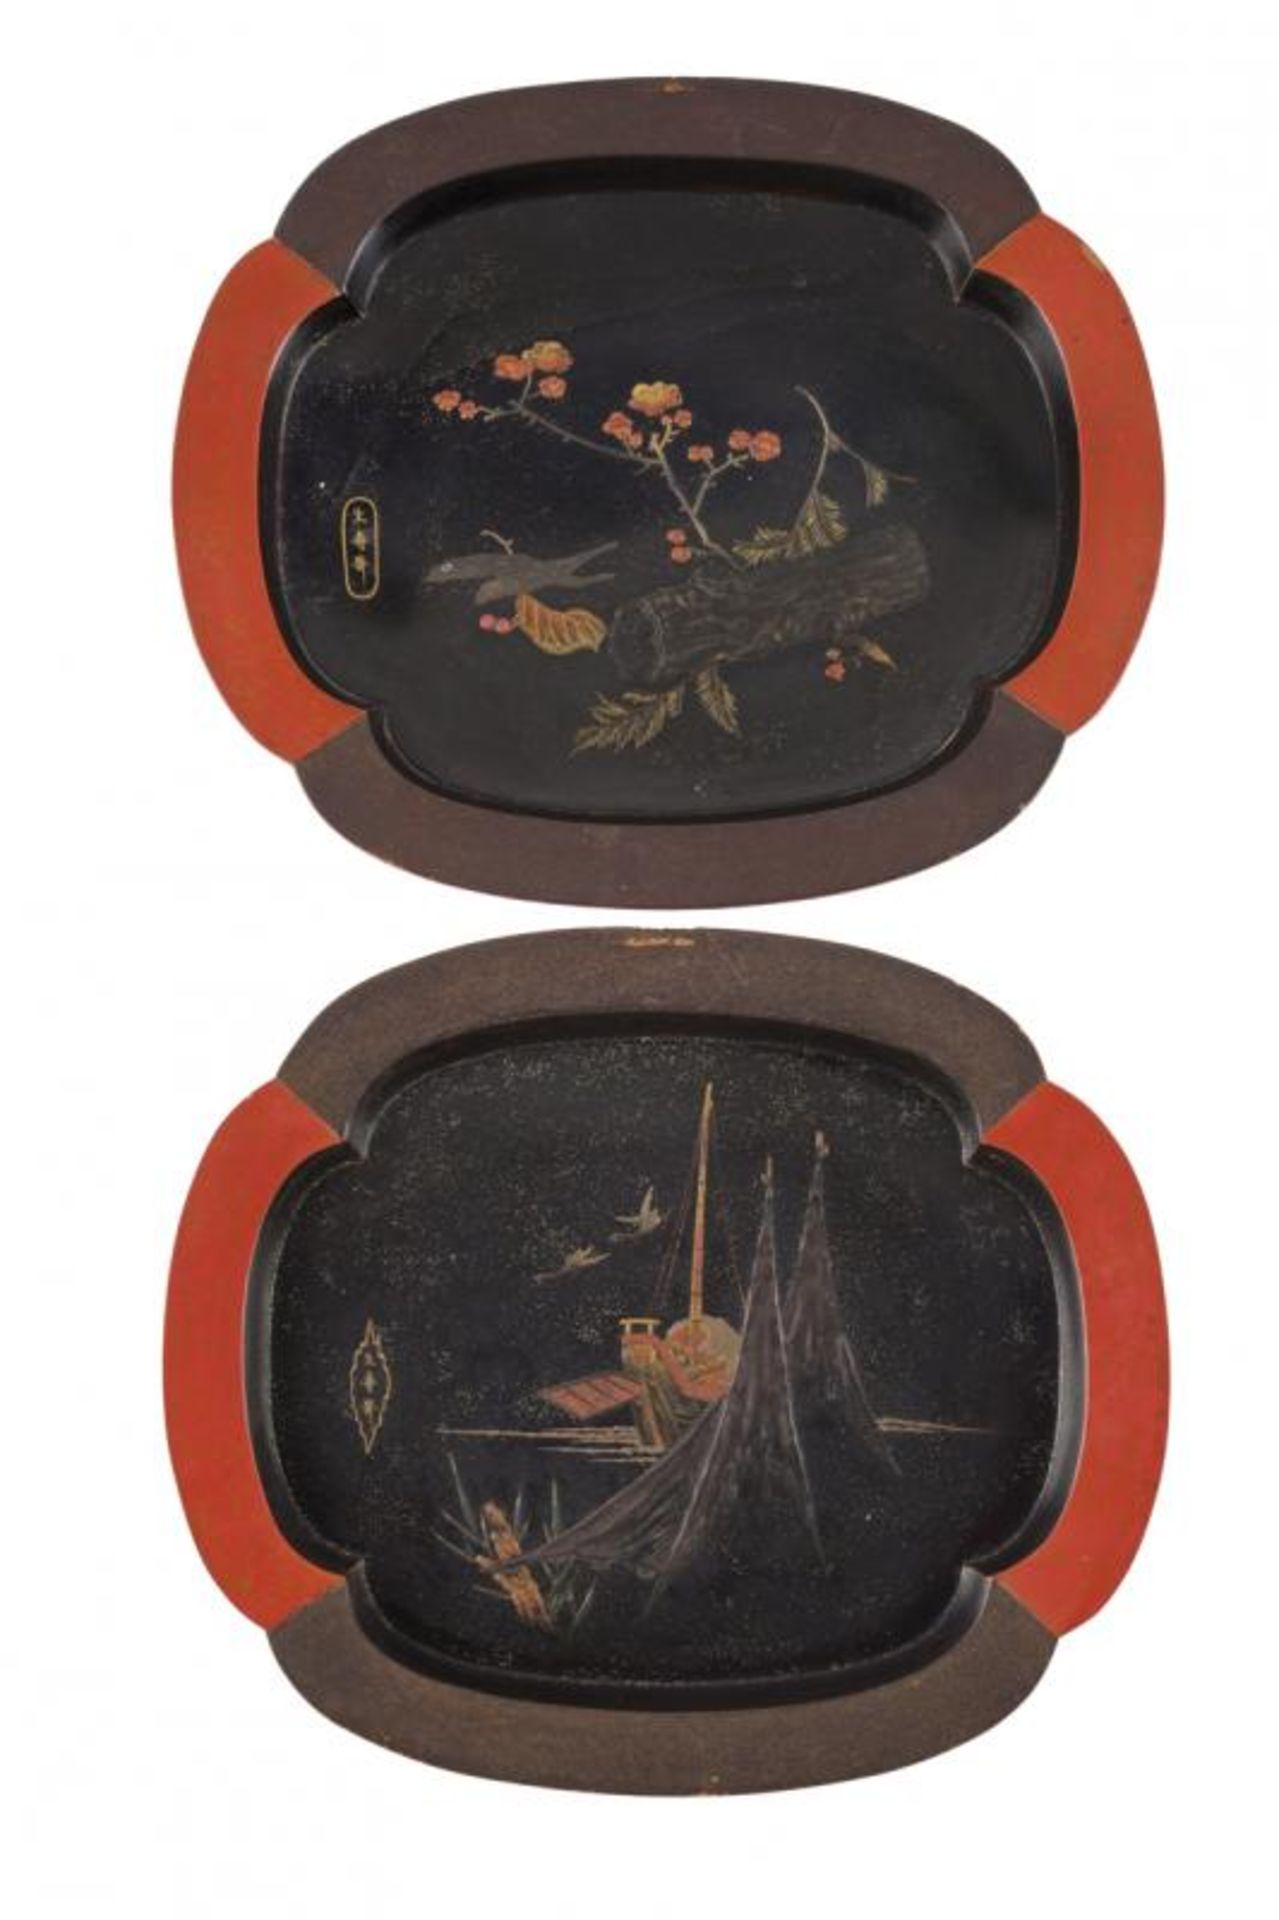 A pair of two lacquered trays